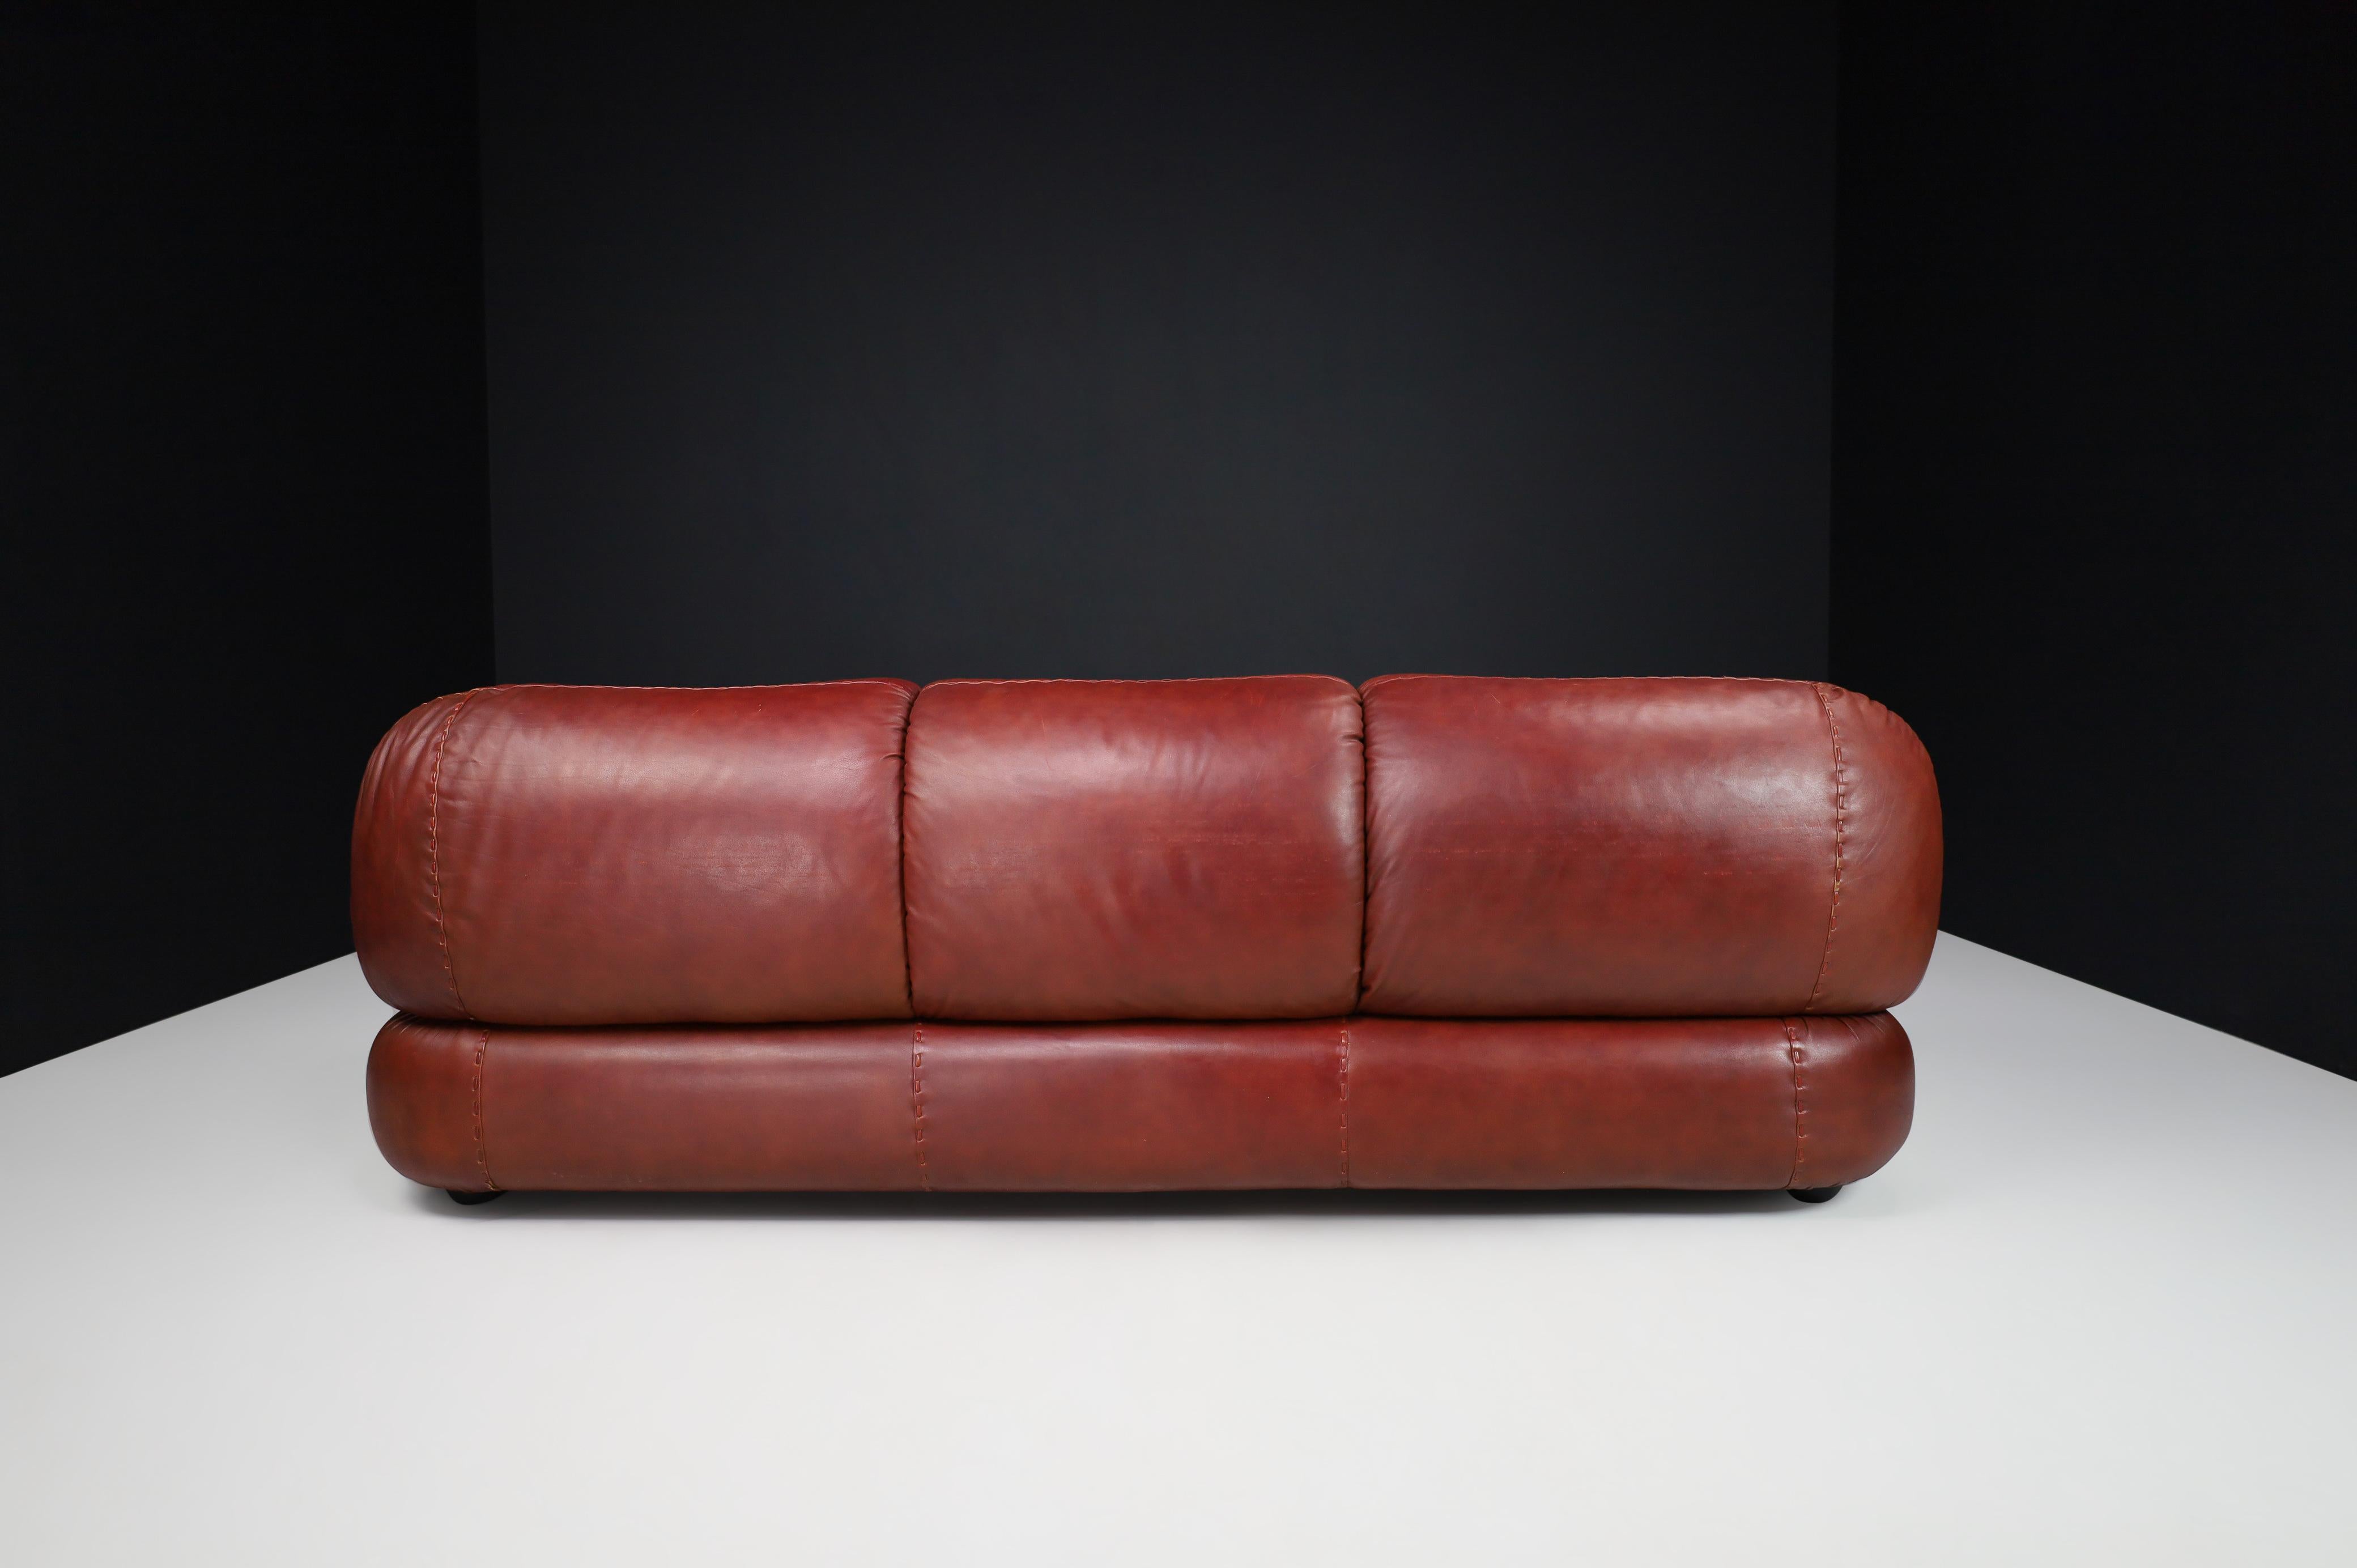 20th Century Large Lounge Sofa in Firebrick Leather by Sapporo for Mobil Girgi, Italy, 1970 For Sale